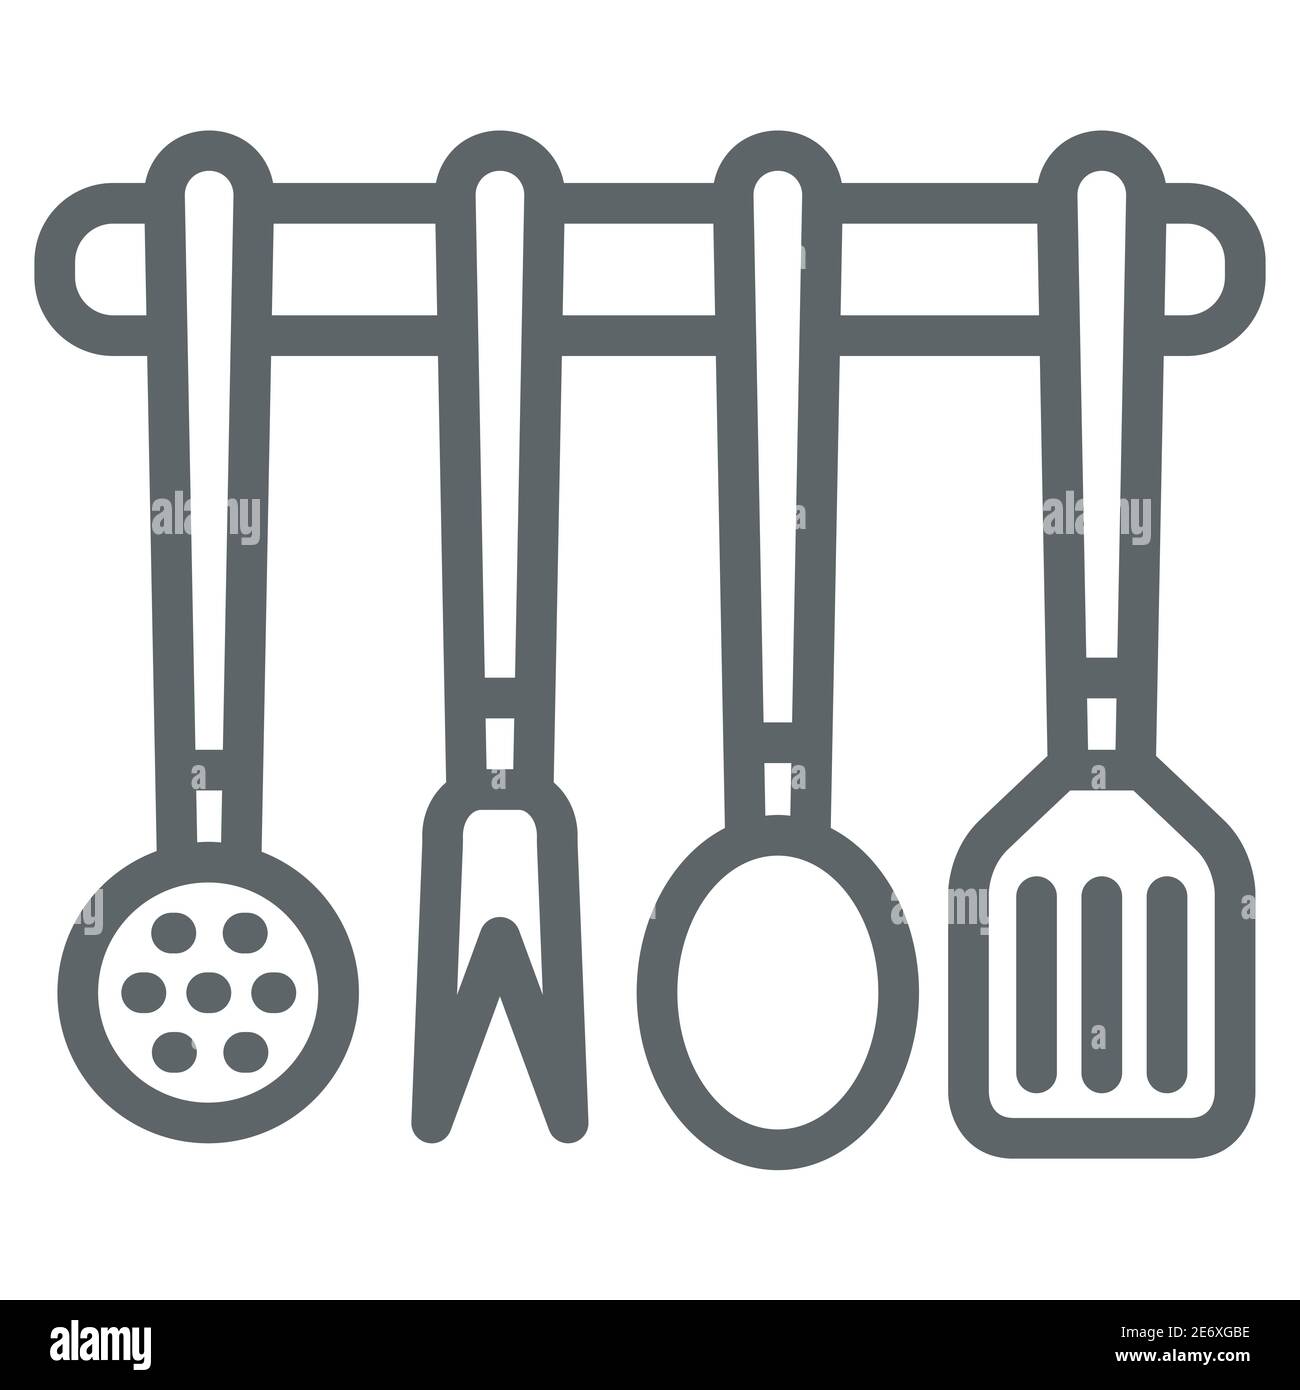 https://c8.alamy.com/comp/2E6XGBE/kitchen-utensils-set-line-icon-kitchen-appliances-concept-cooking-tools-sign-on-white-background-hanging-kitchen-utensils-icon-in-outline-style-for-2E6XGBE.jpg